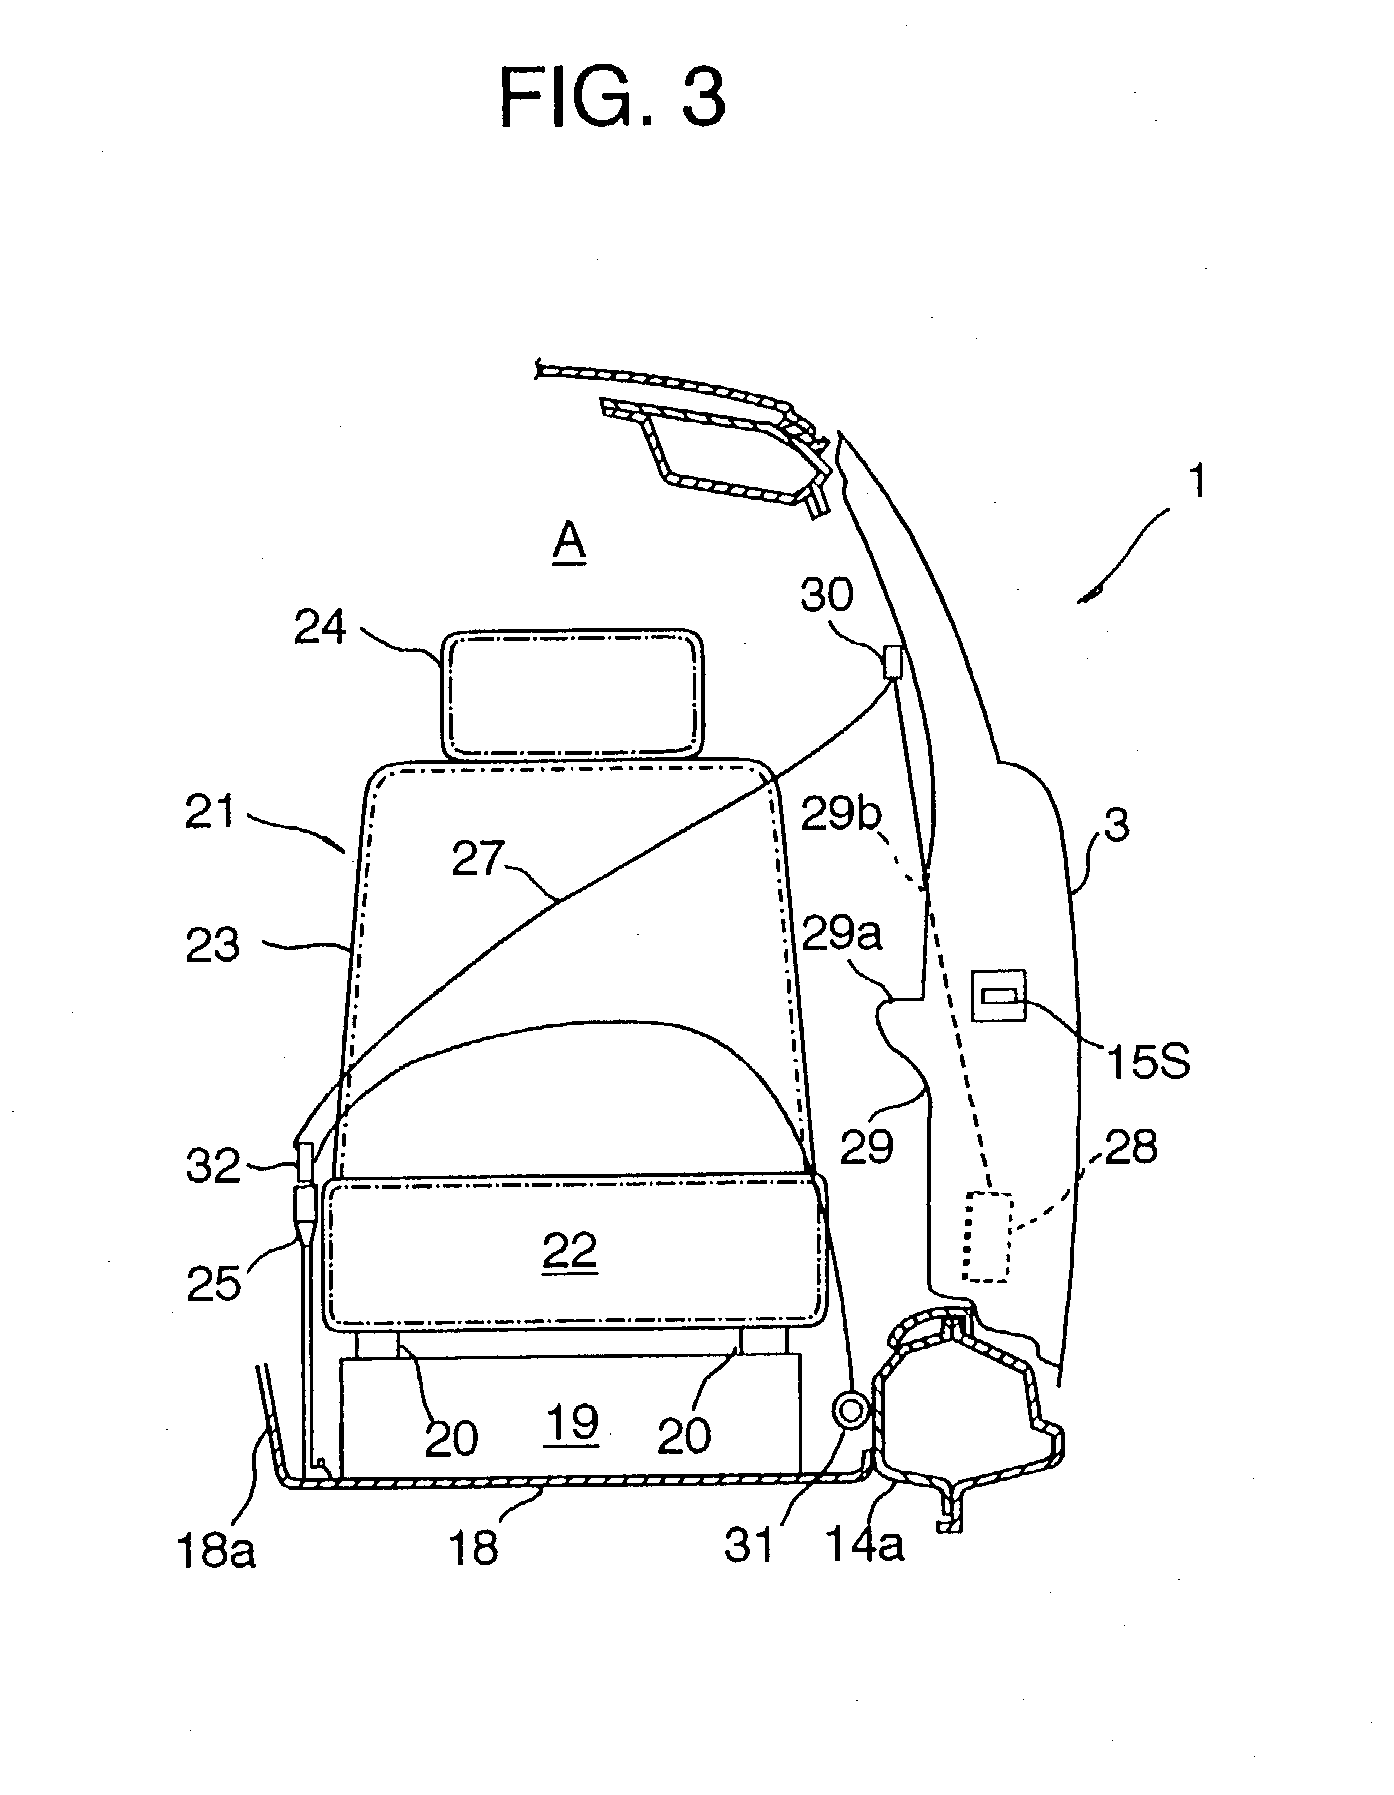 Front seatbelt system for vehicle